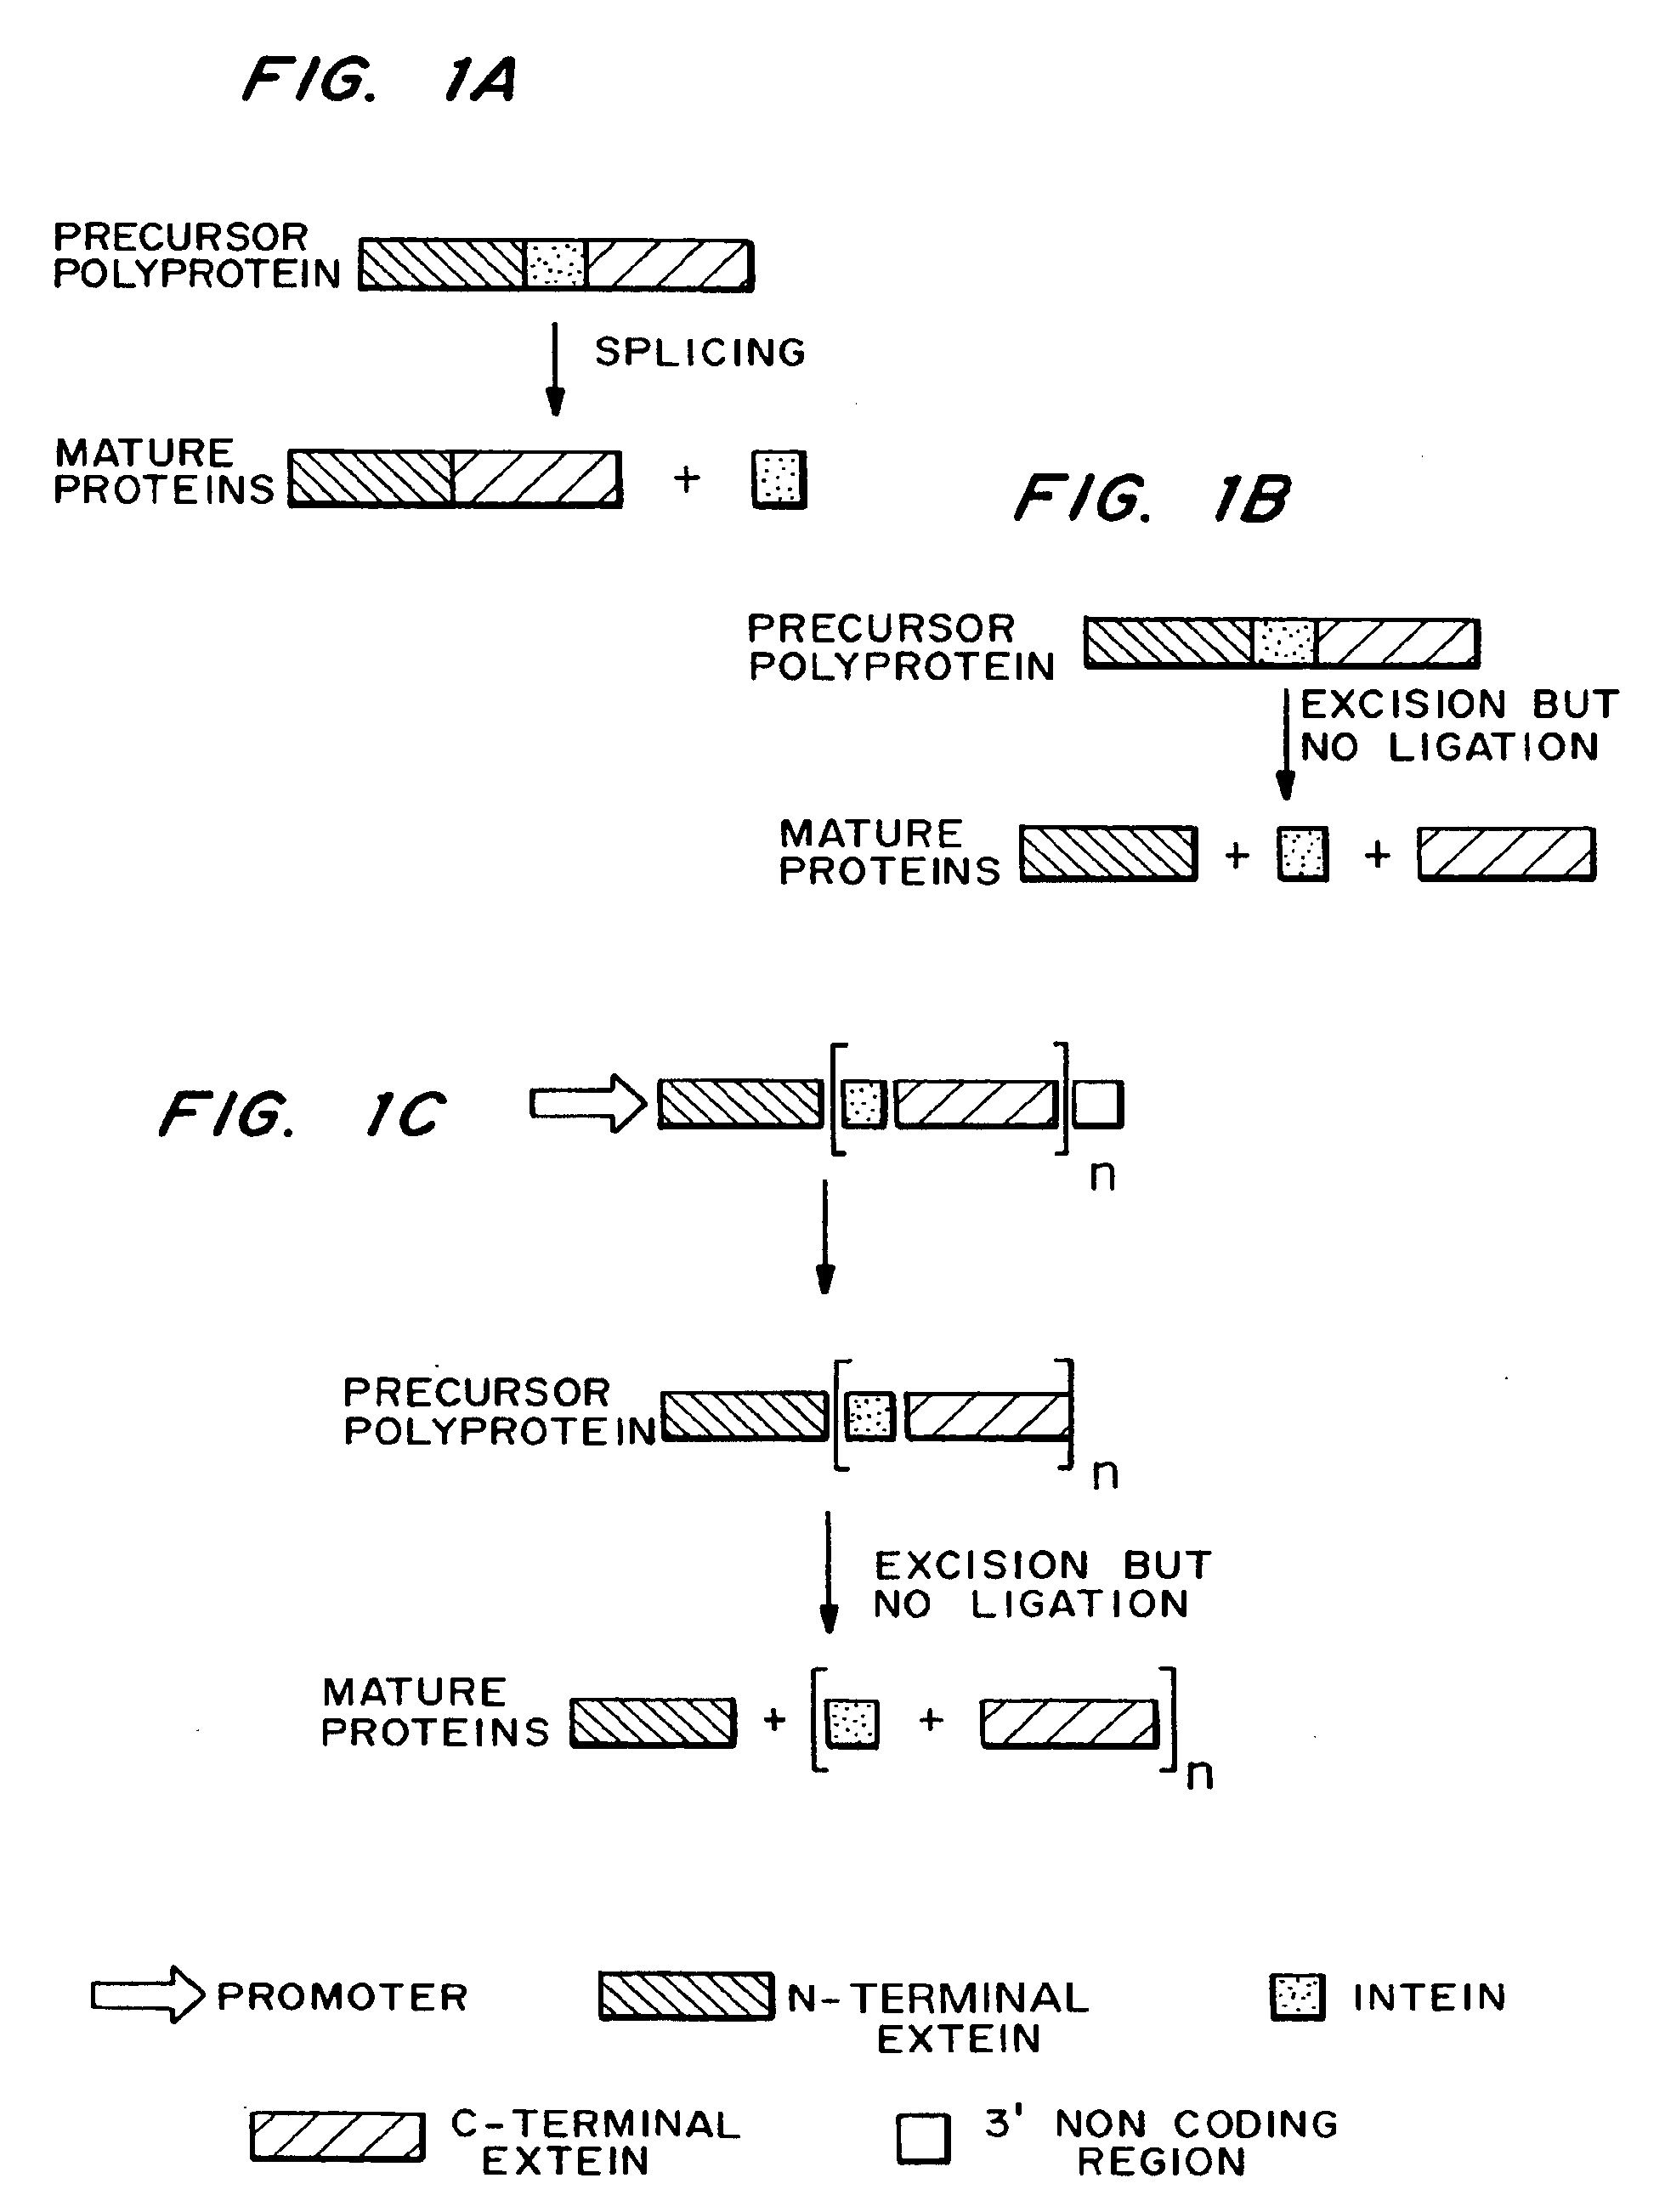 Multi-gene expression constructs containing modified inteins